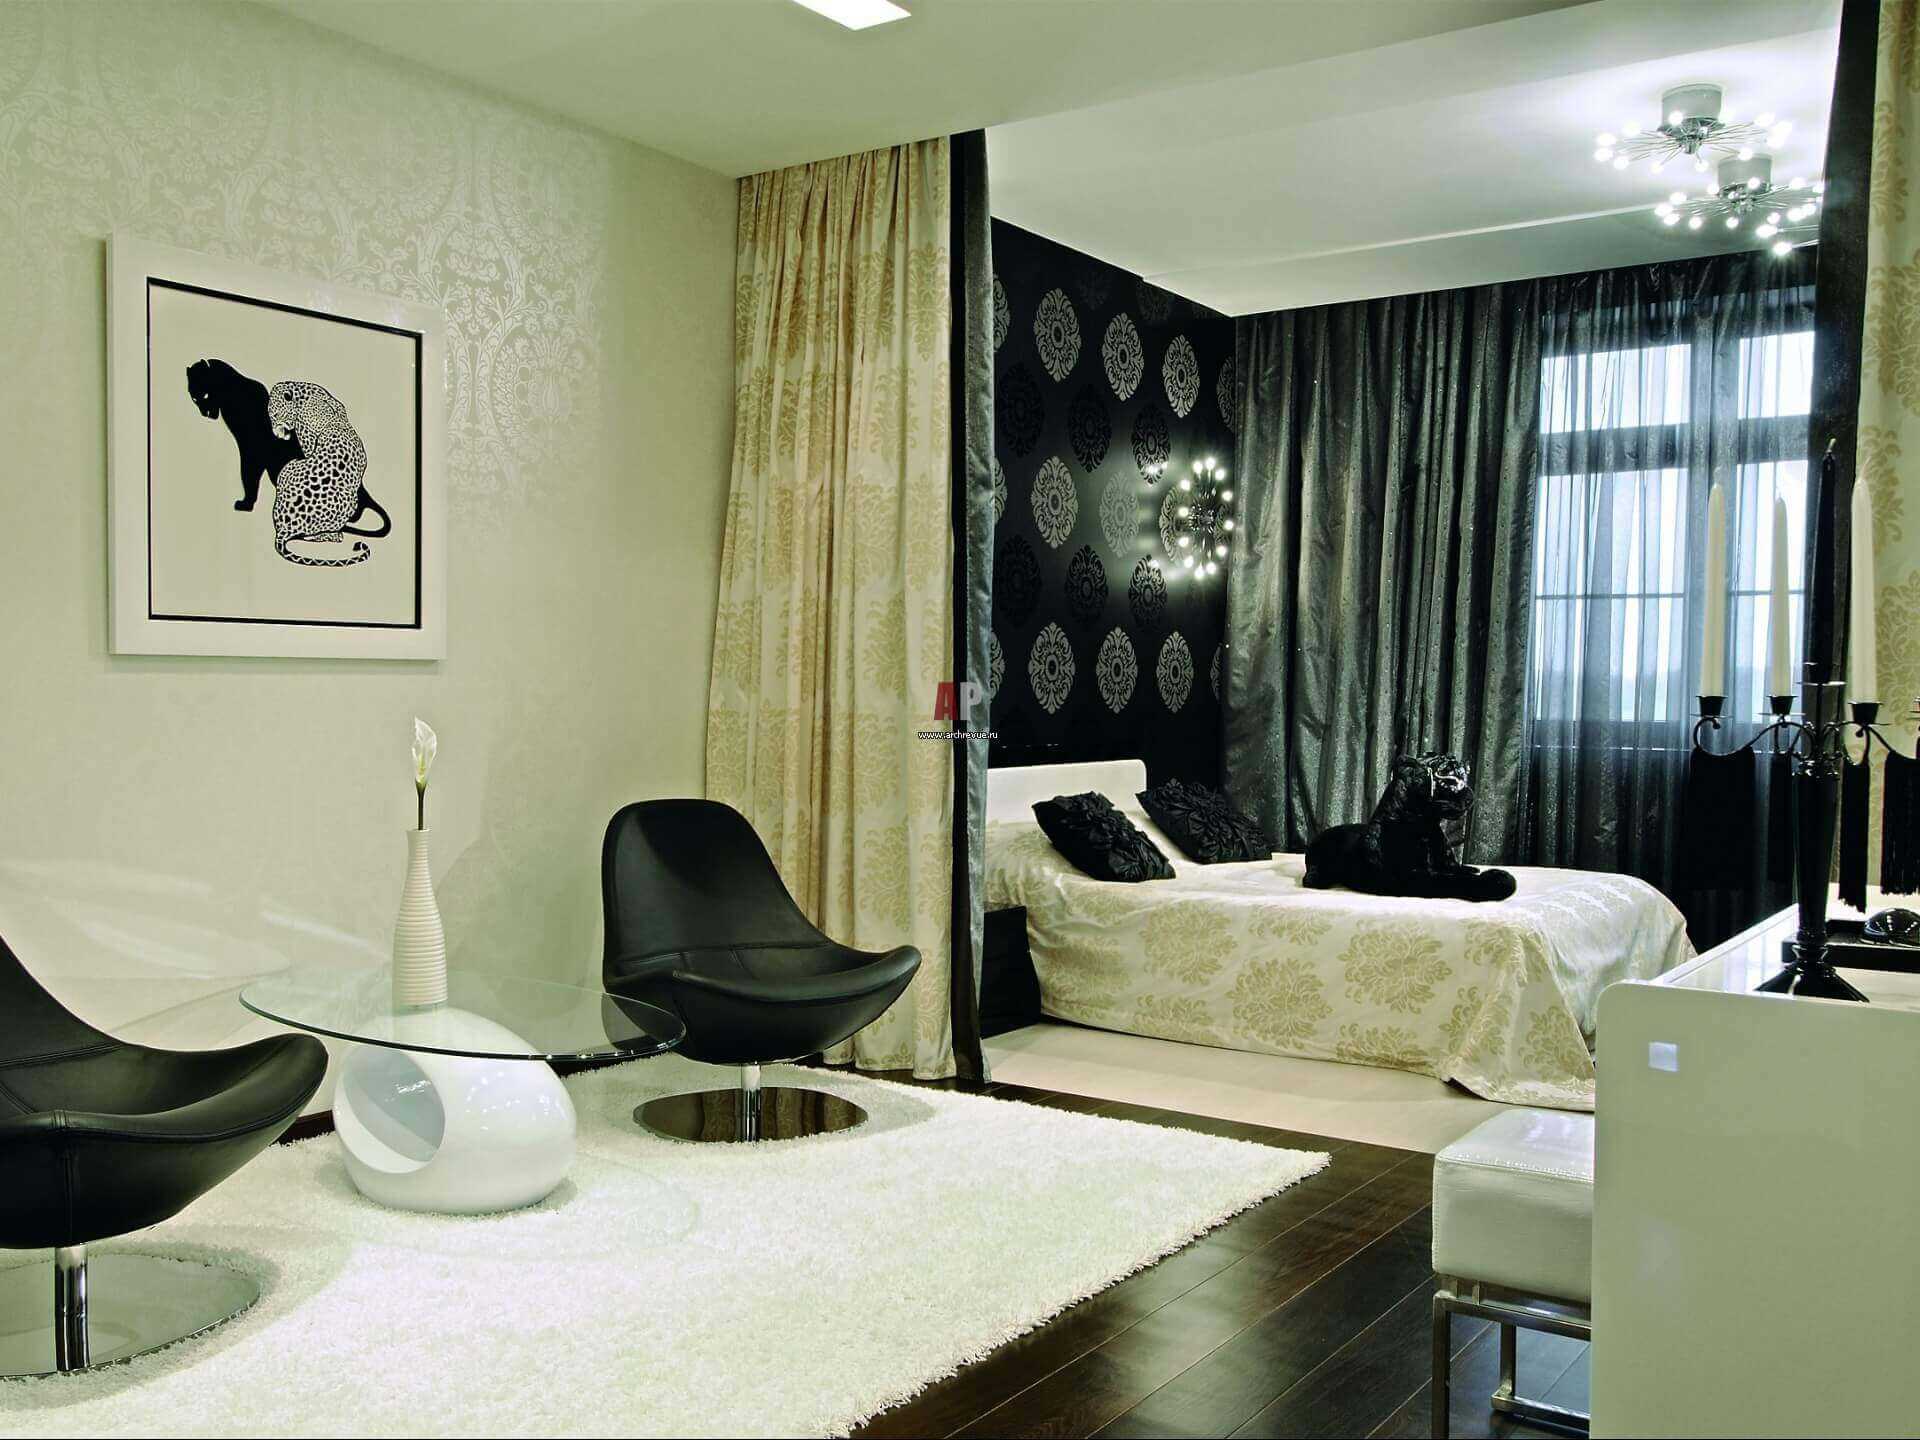 An example of the bright style of the living room bedroom